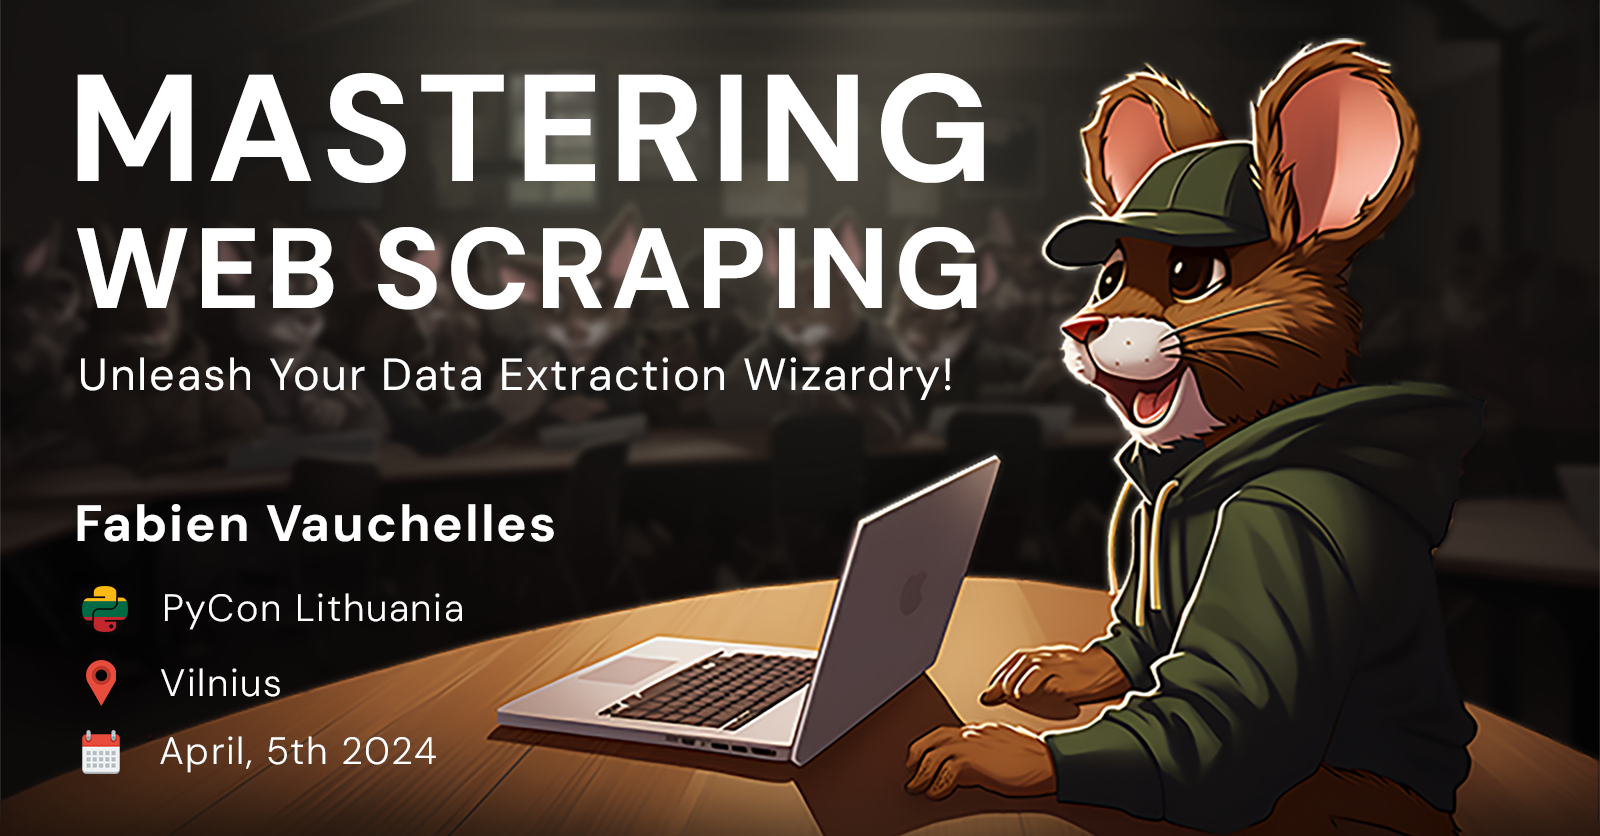 Mastering Web Scraping: Unleash Your Data Extraction Wizardry!